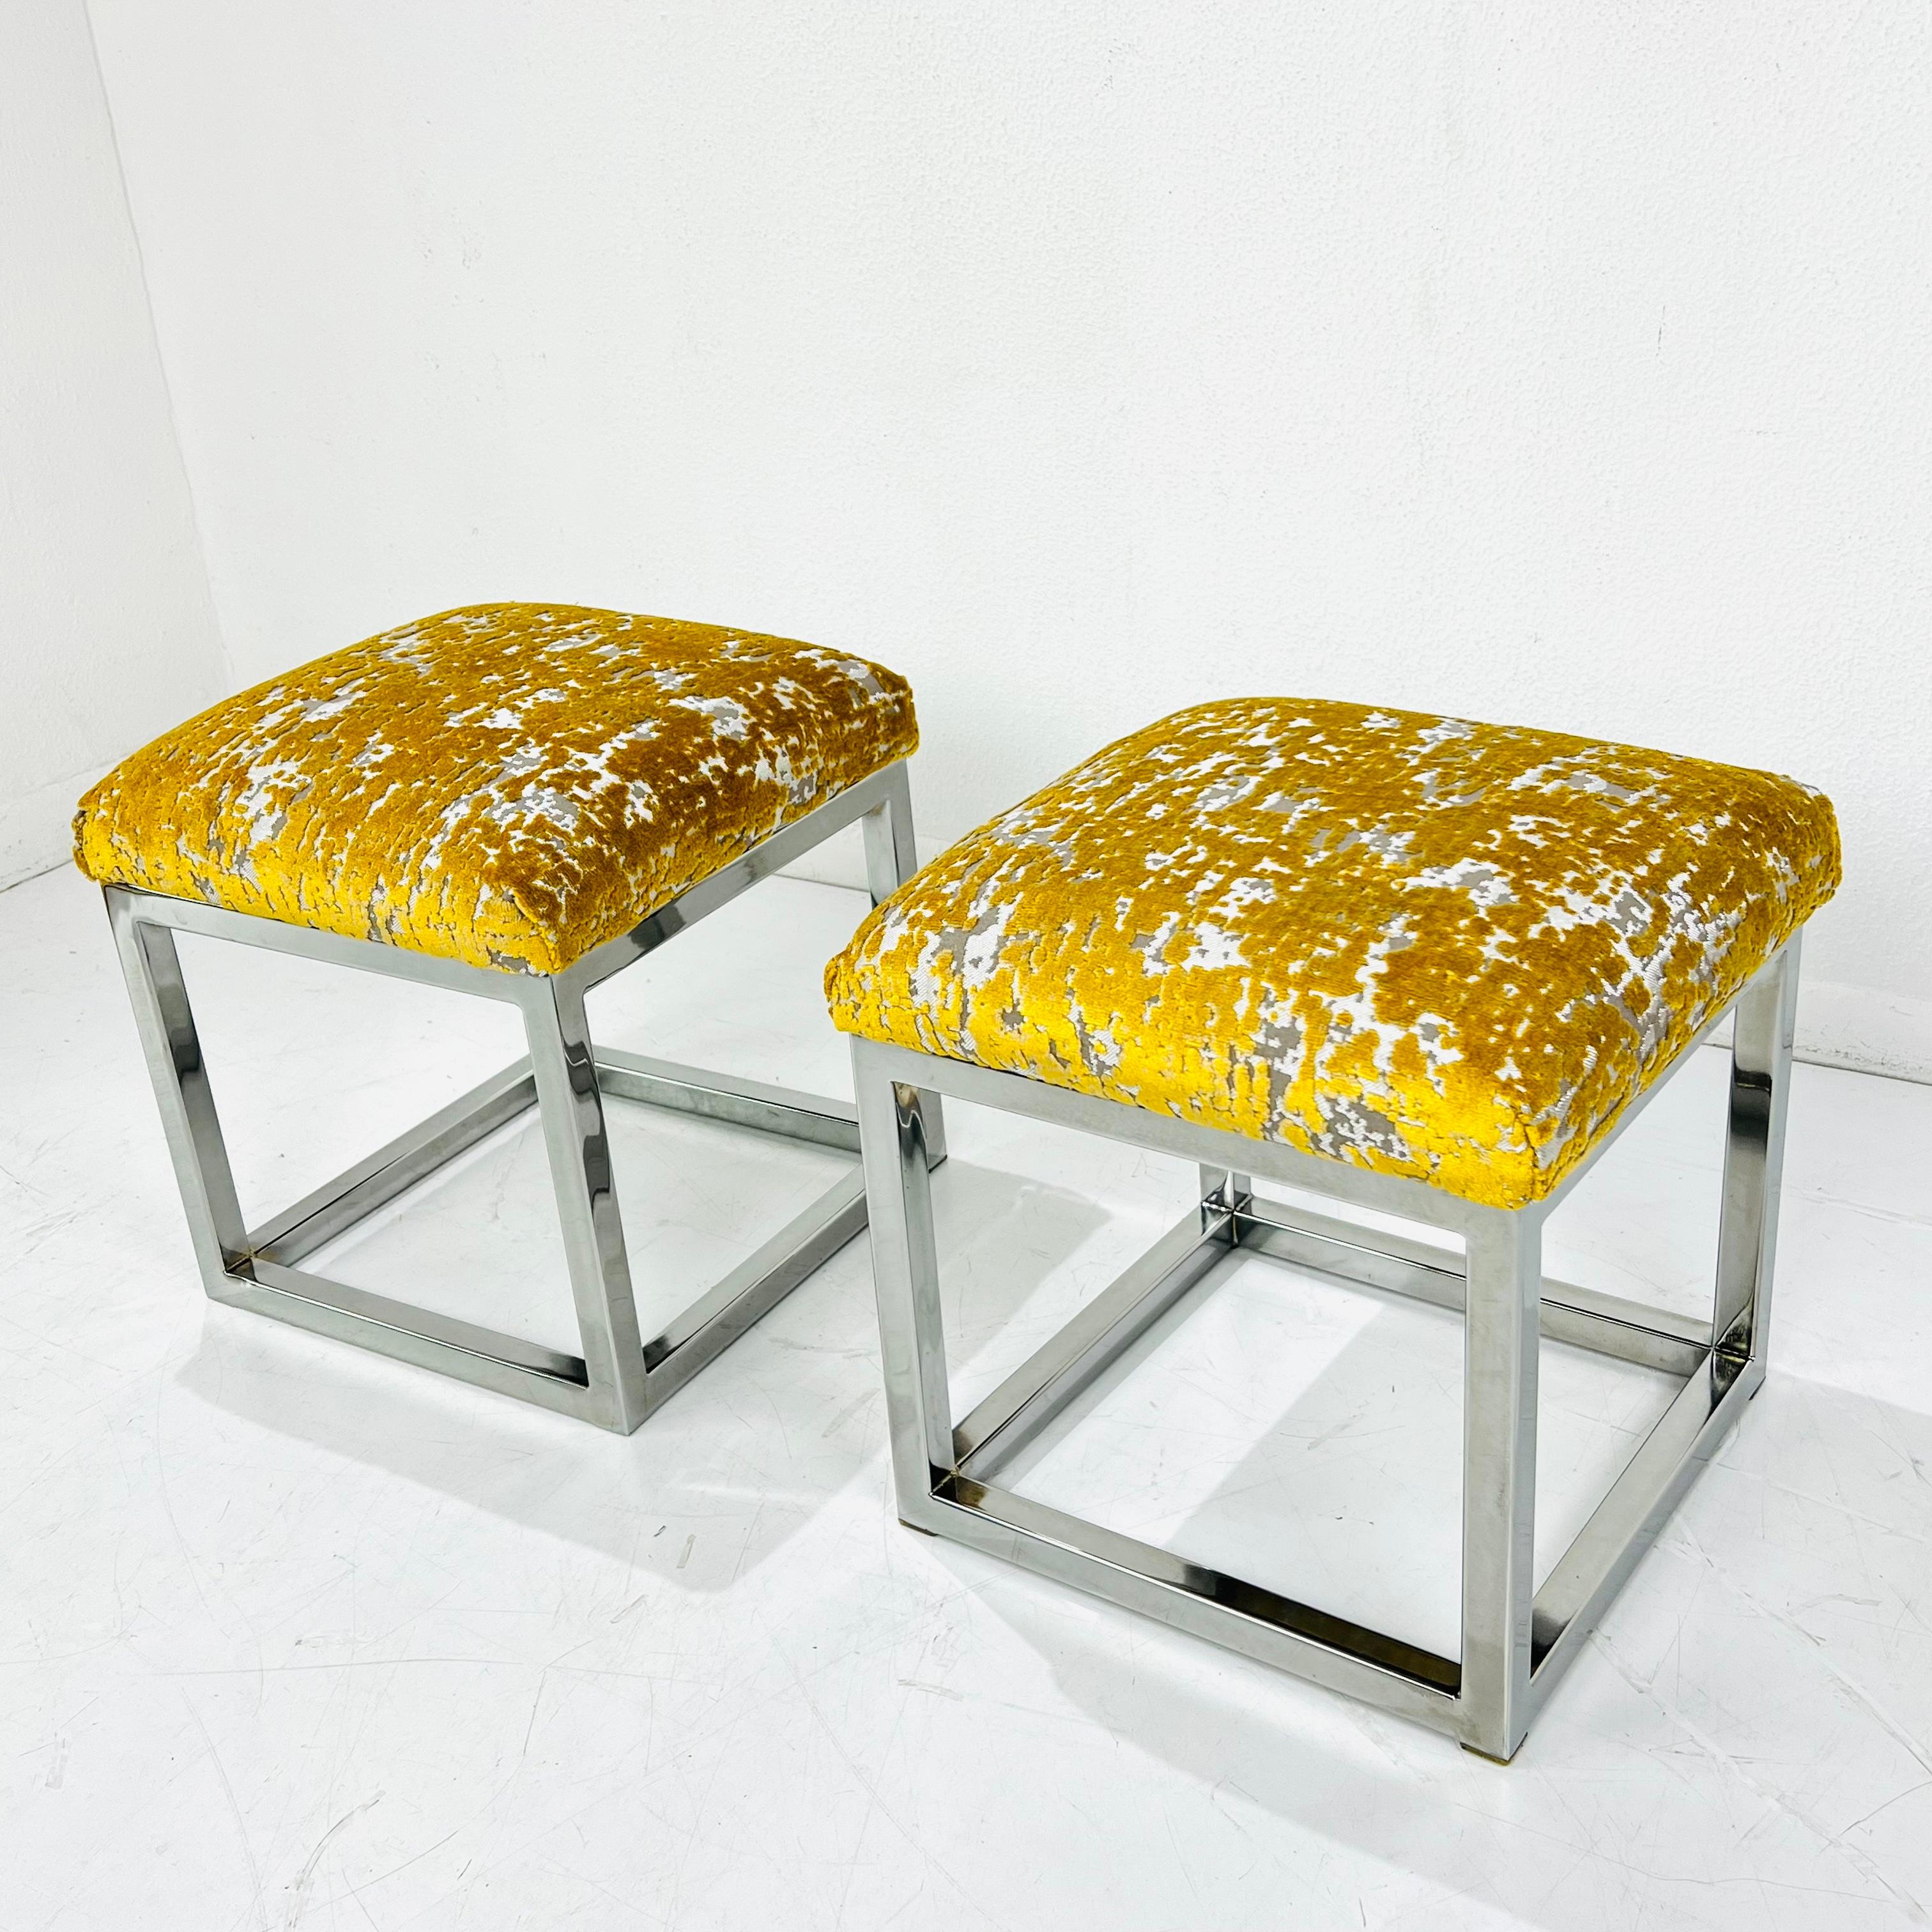 Pair of Vintage Chrome Frame Footstools / Ottomans In Good Condition For Sale In Dallas, TX